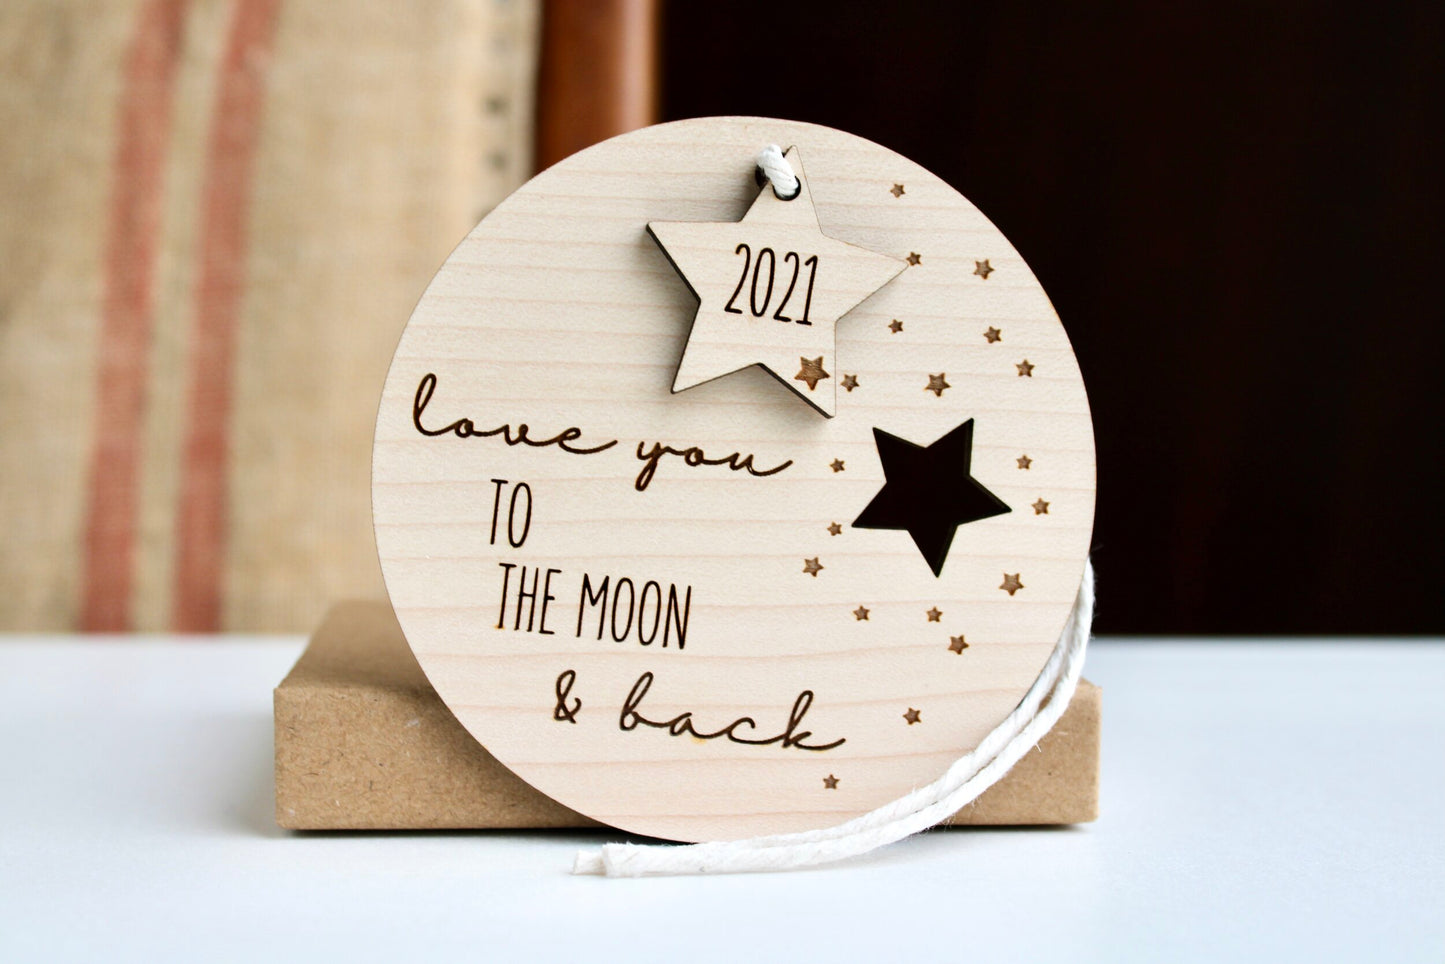 Love you to the moon wooden circle decoration